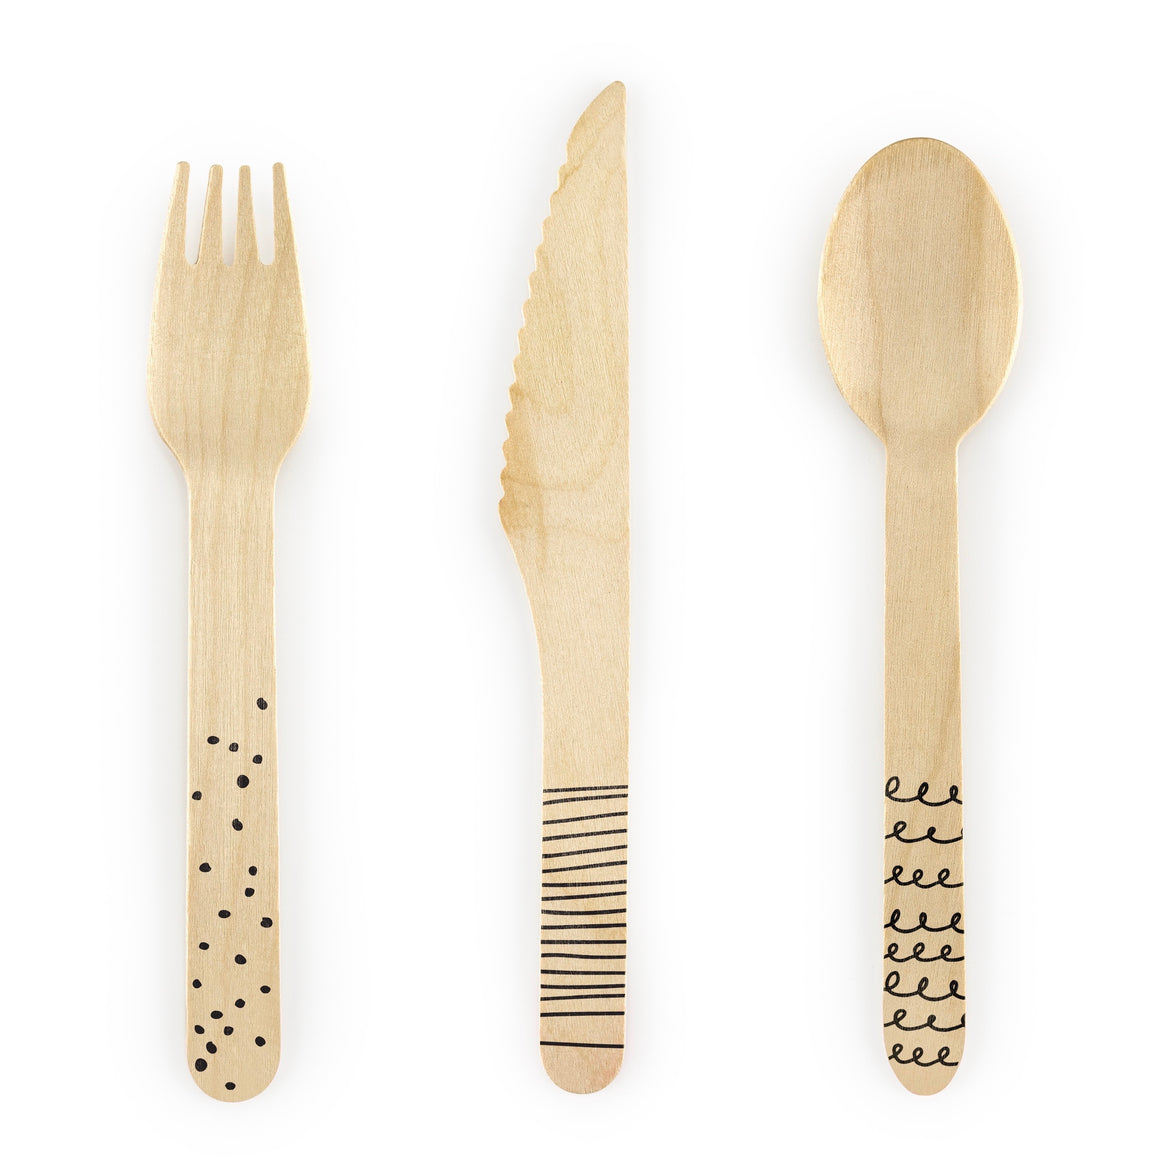 WOODEN CUTLERY SET - BLACK PATTERNS (for 6)